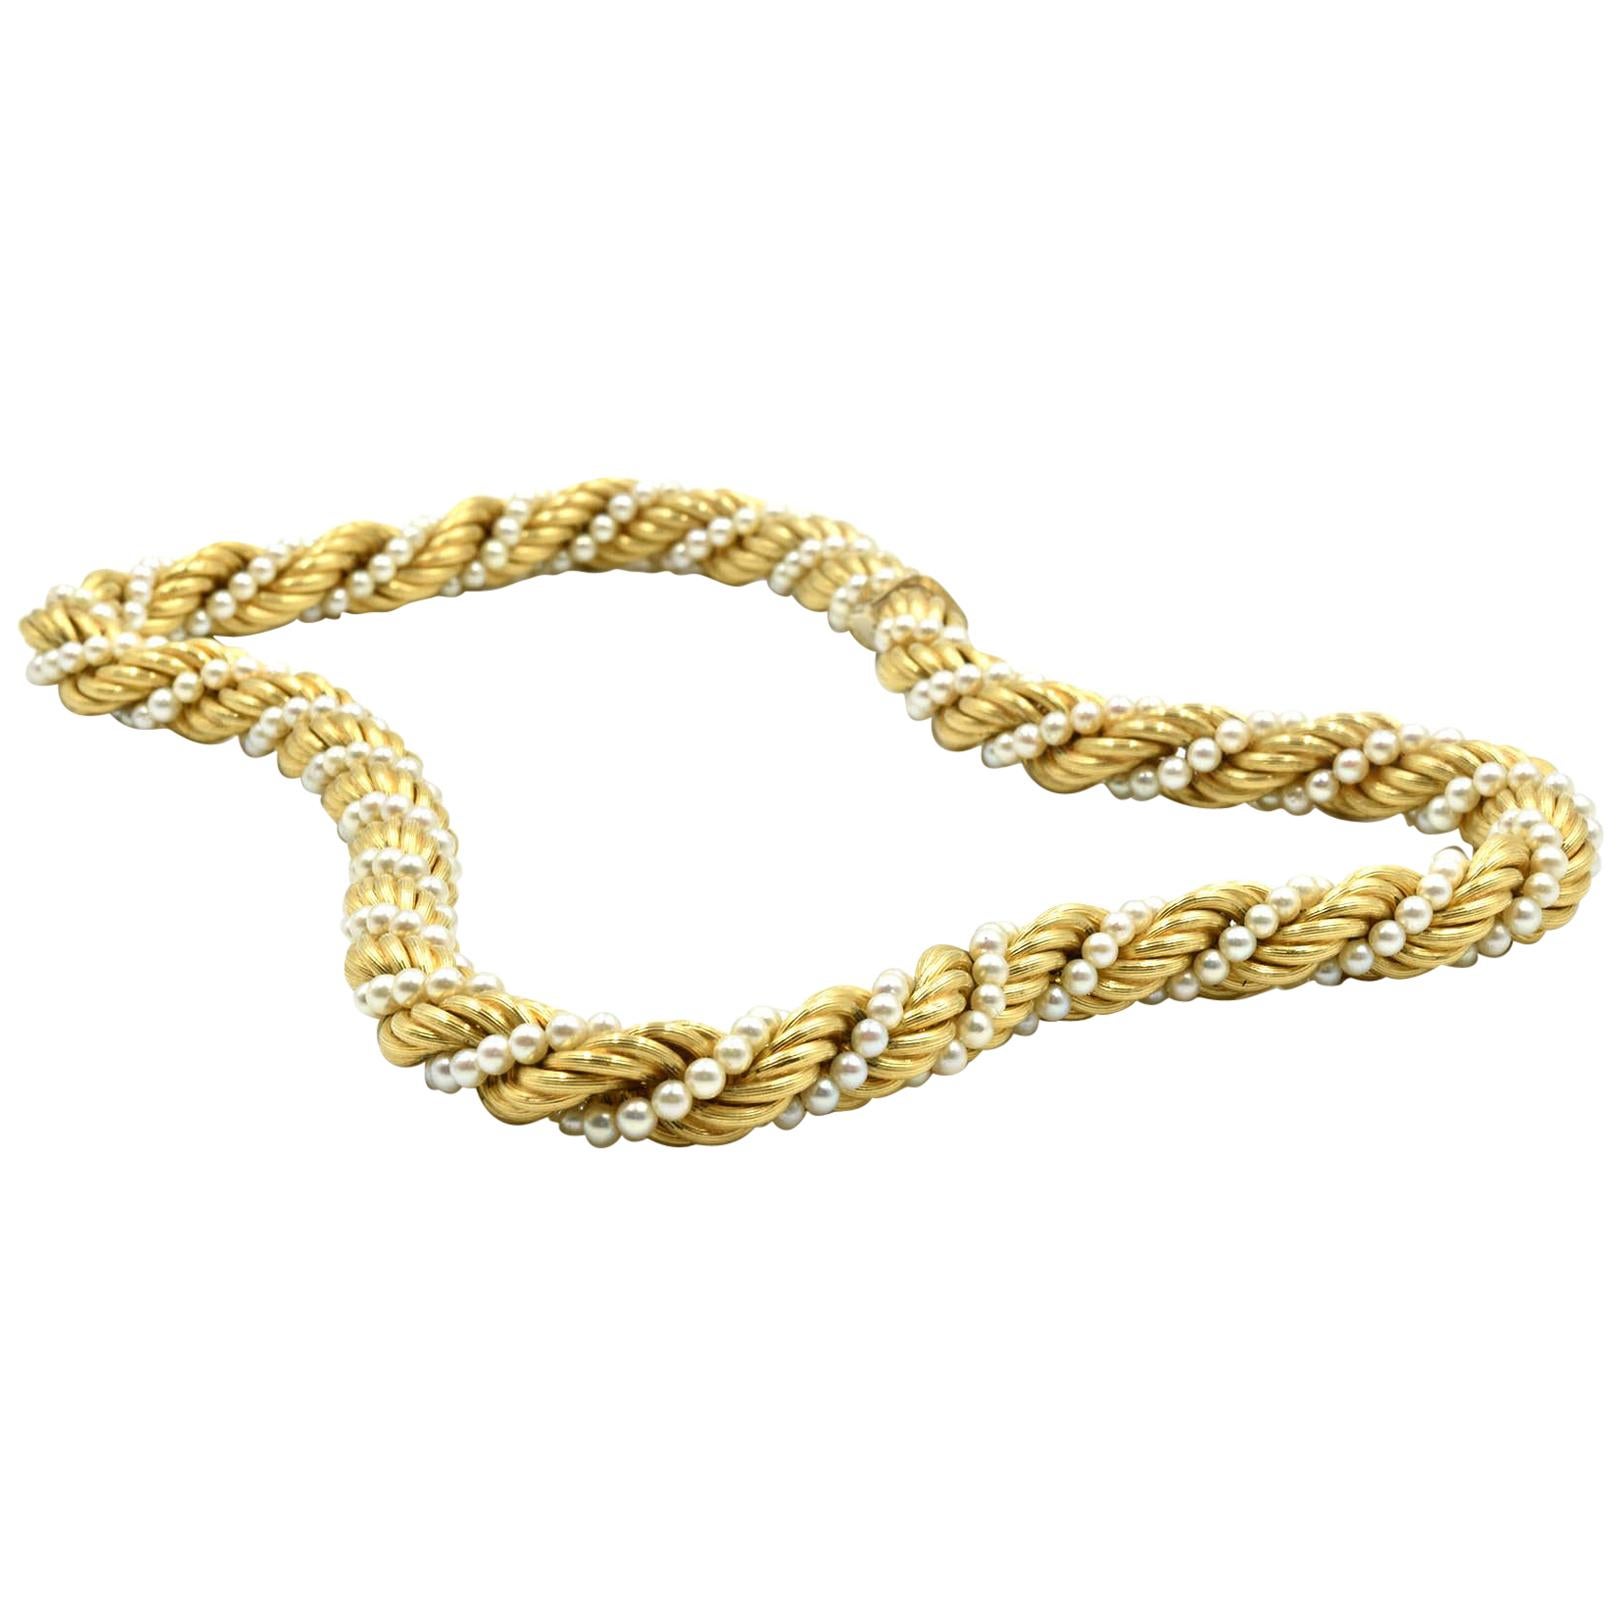 Strand of Braided Gold with Cultured Pearls Necklace